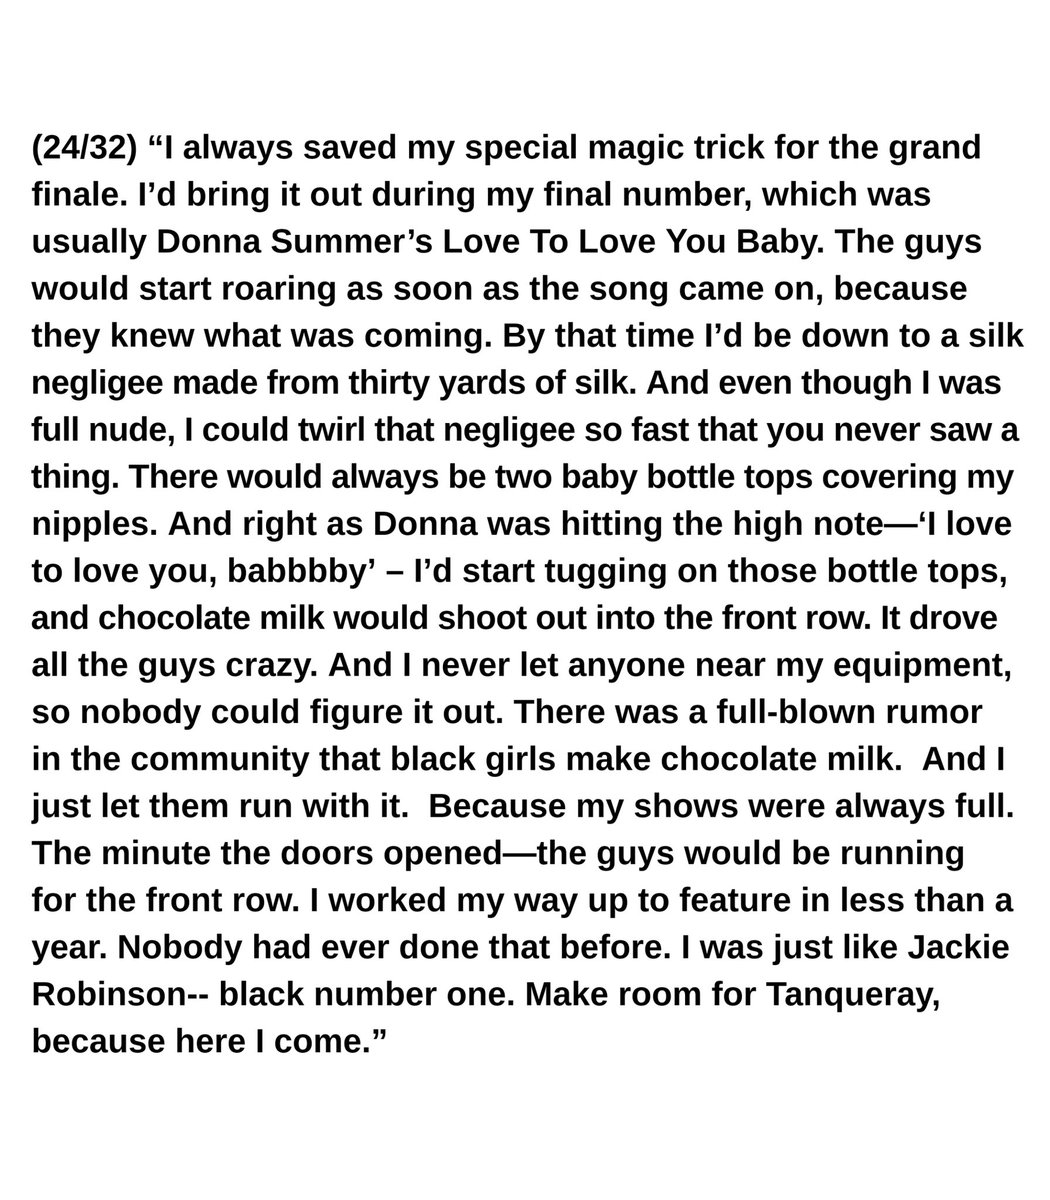 (24/32) “I always saved my special magic trick for the grand finale. I’d bring it out during my final number, which was usually Donna Summer’s Love To Love You Baby. The guys would start roaring as soon as the song came on..." #TattletalesfromTanqueray